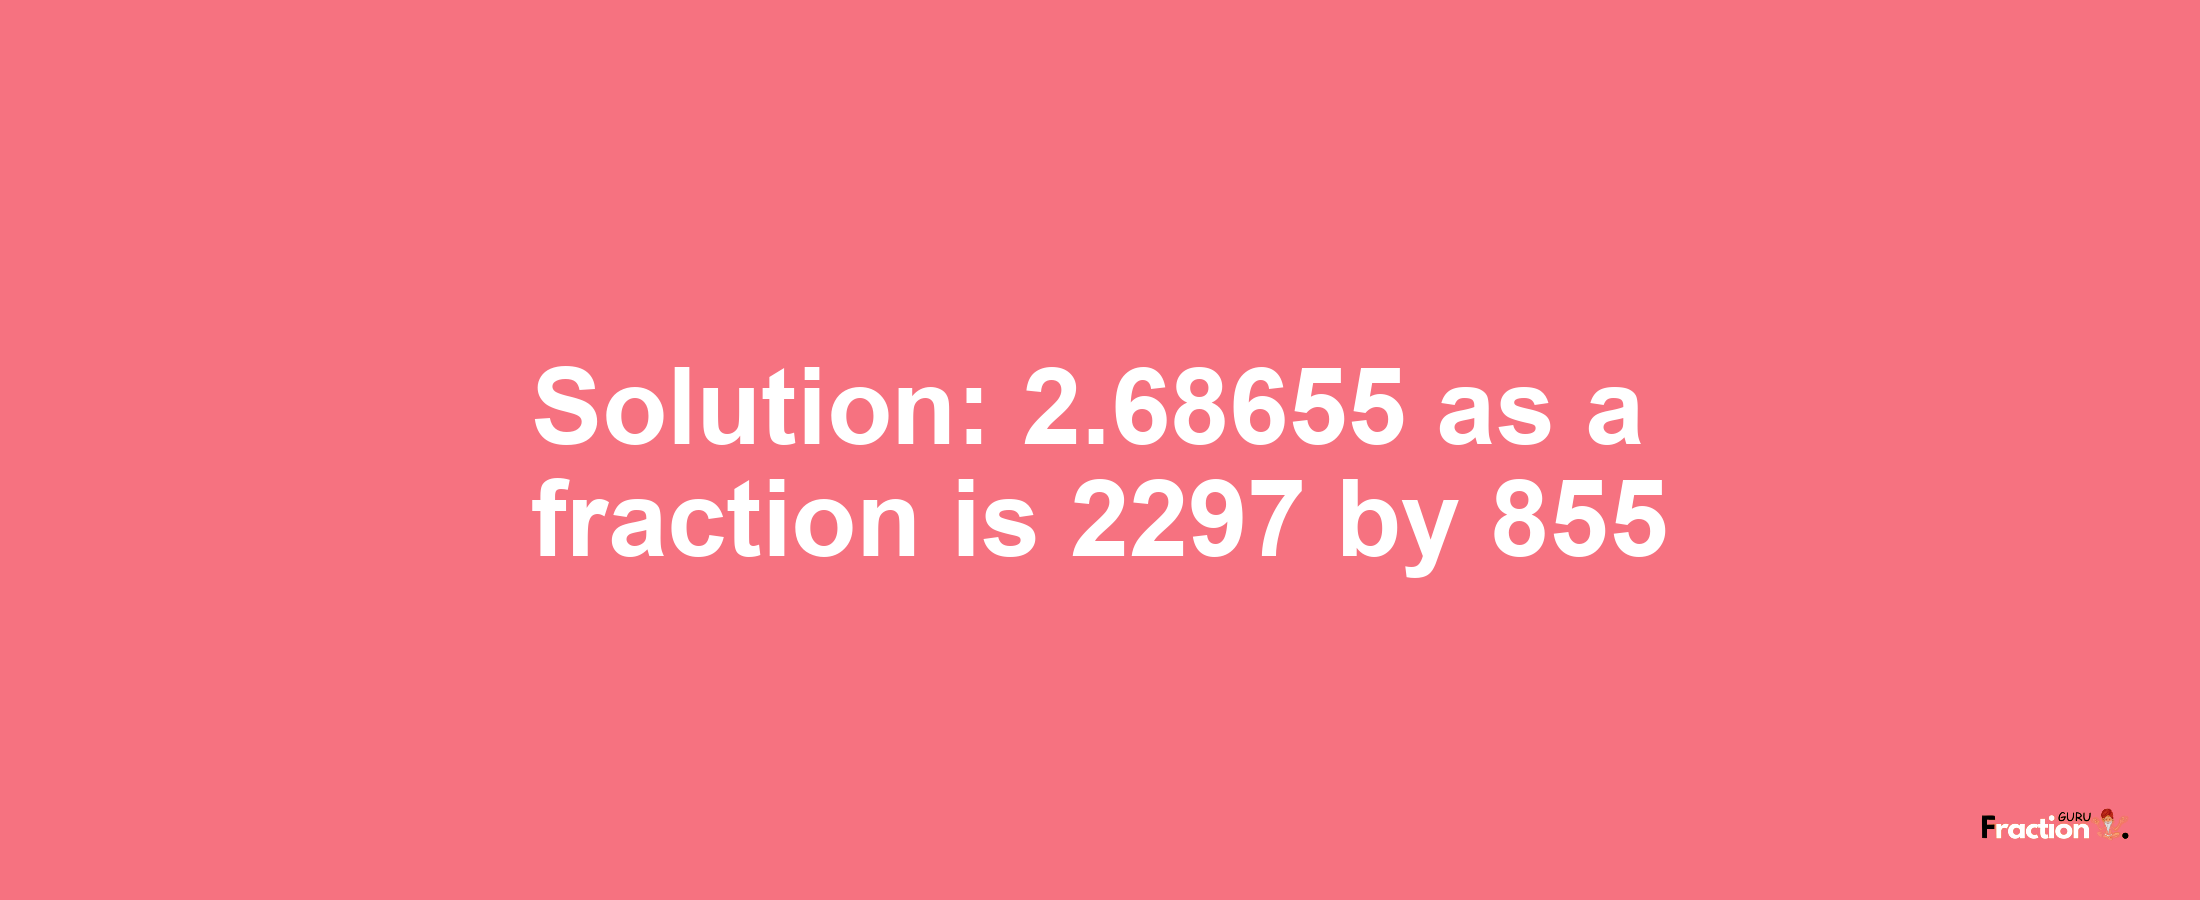 Solution:2.68655 as a fraction is 2297/855